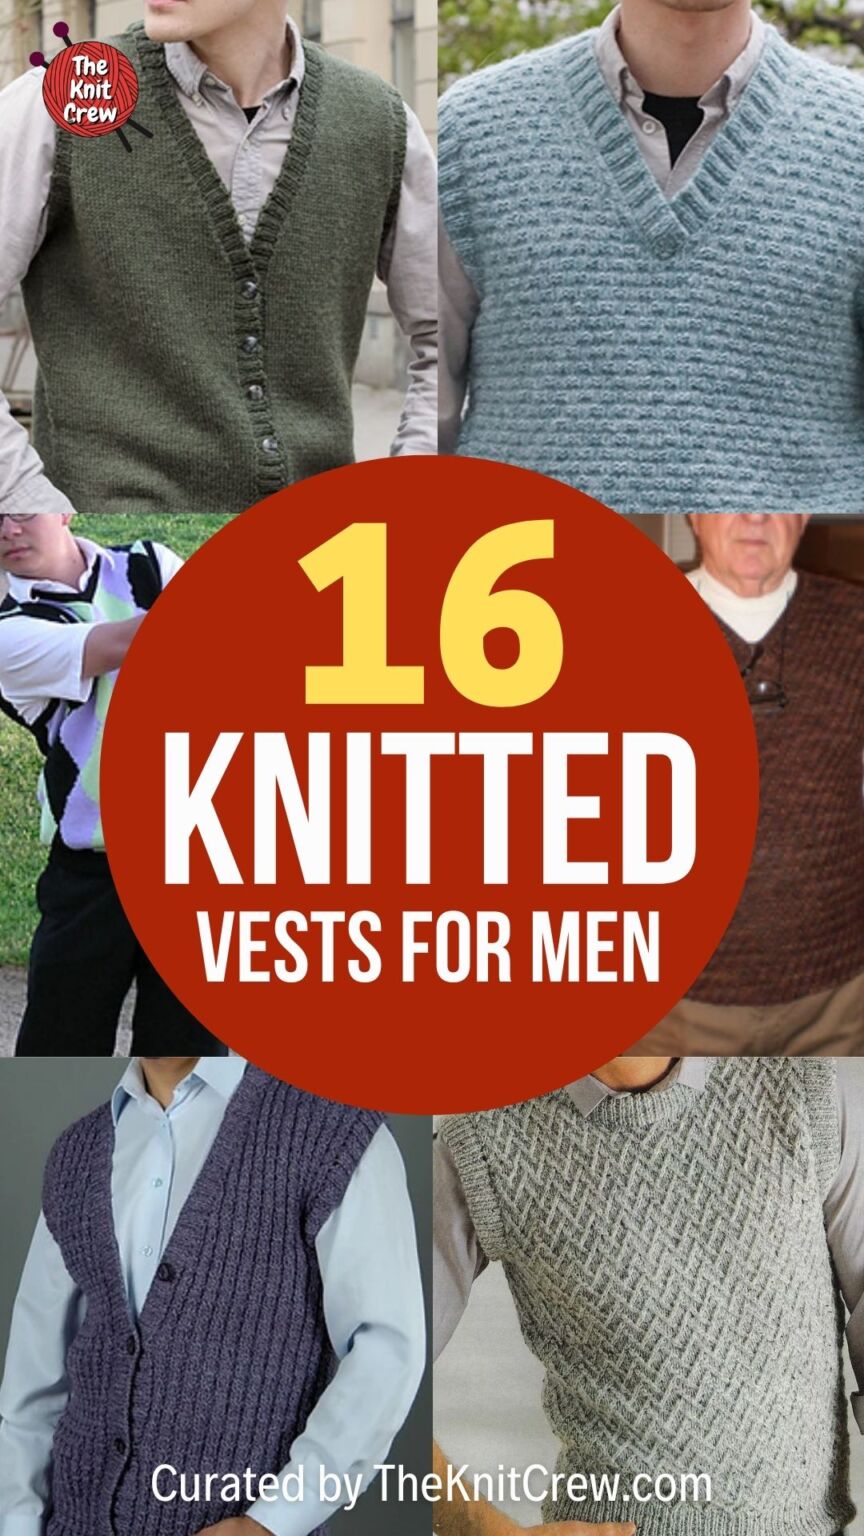 16 Classic Knitted Men's Vest Patterns - The Knit Crew